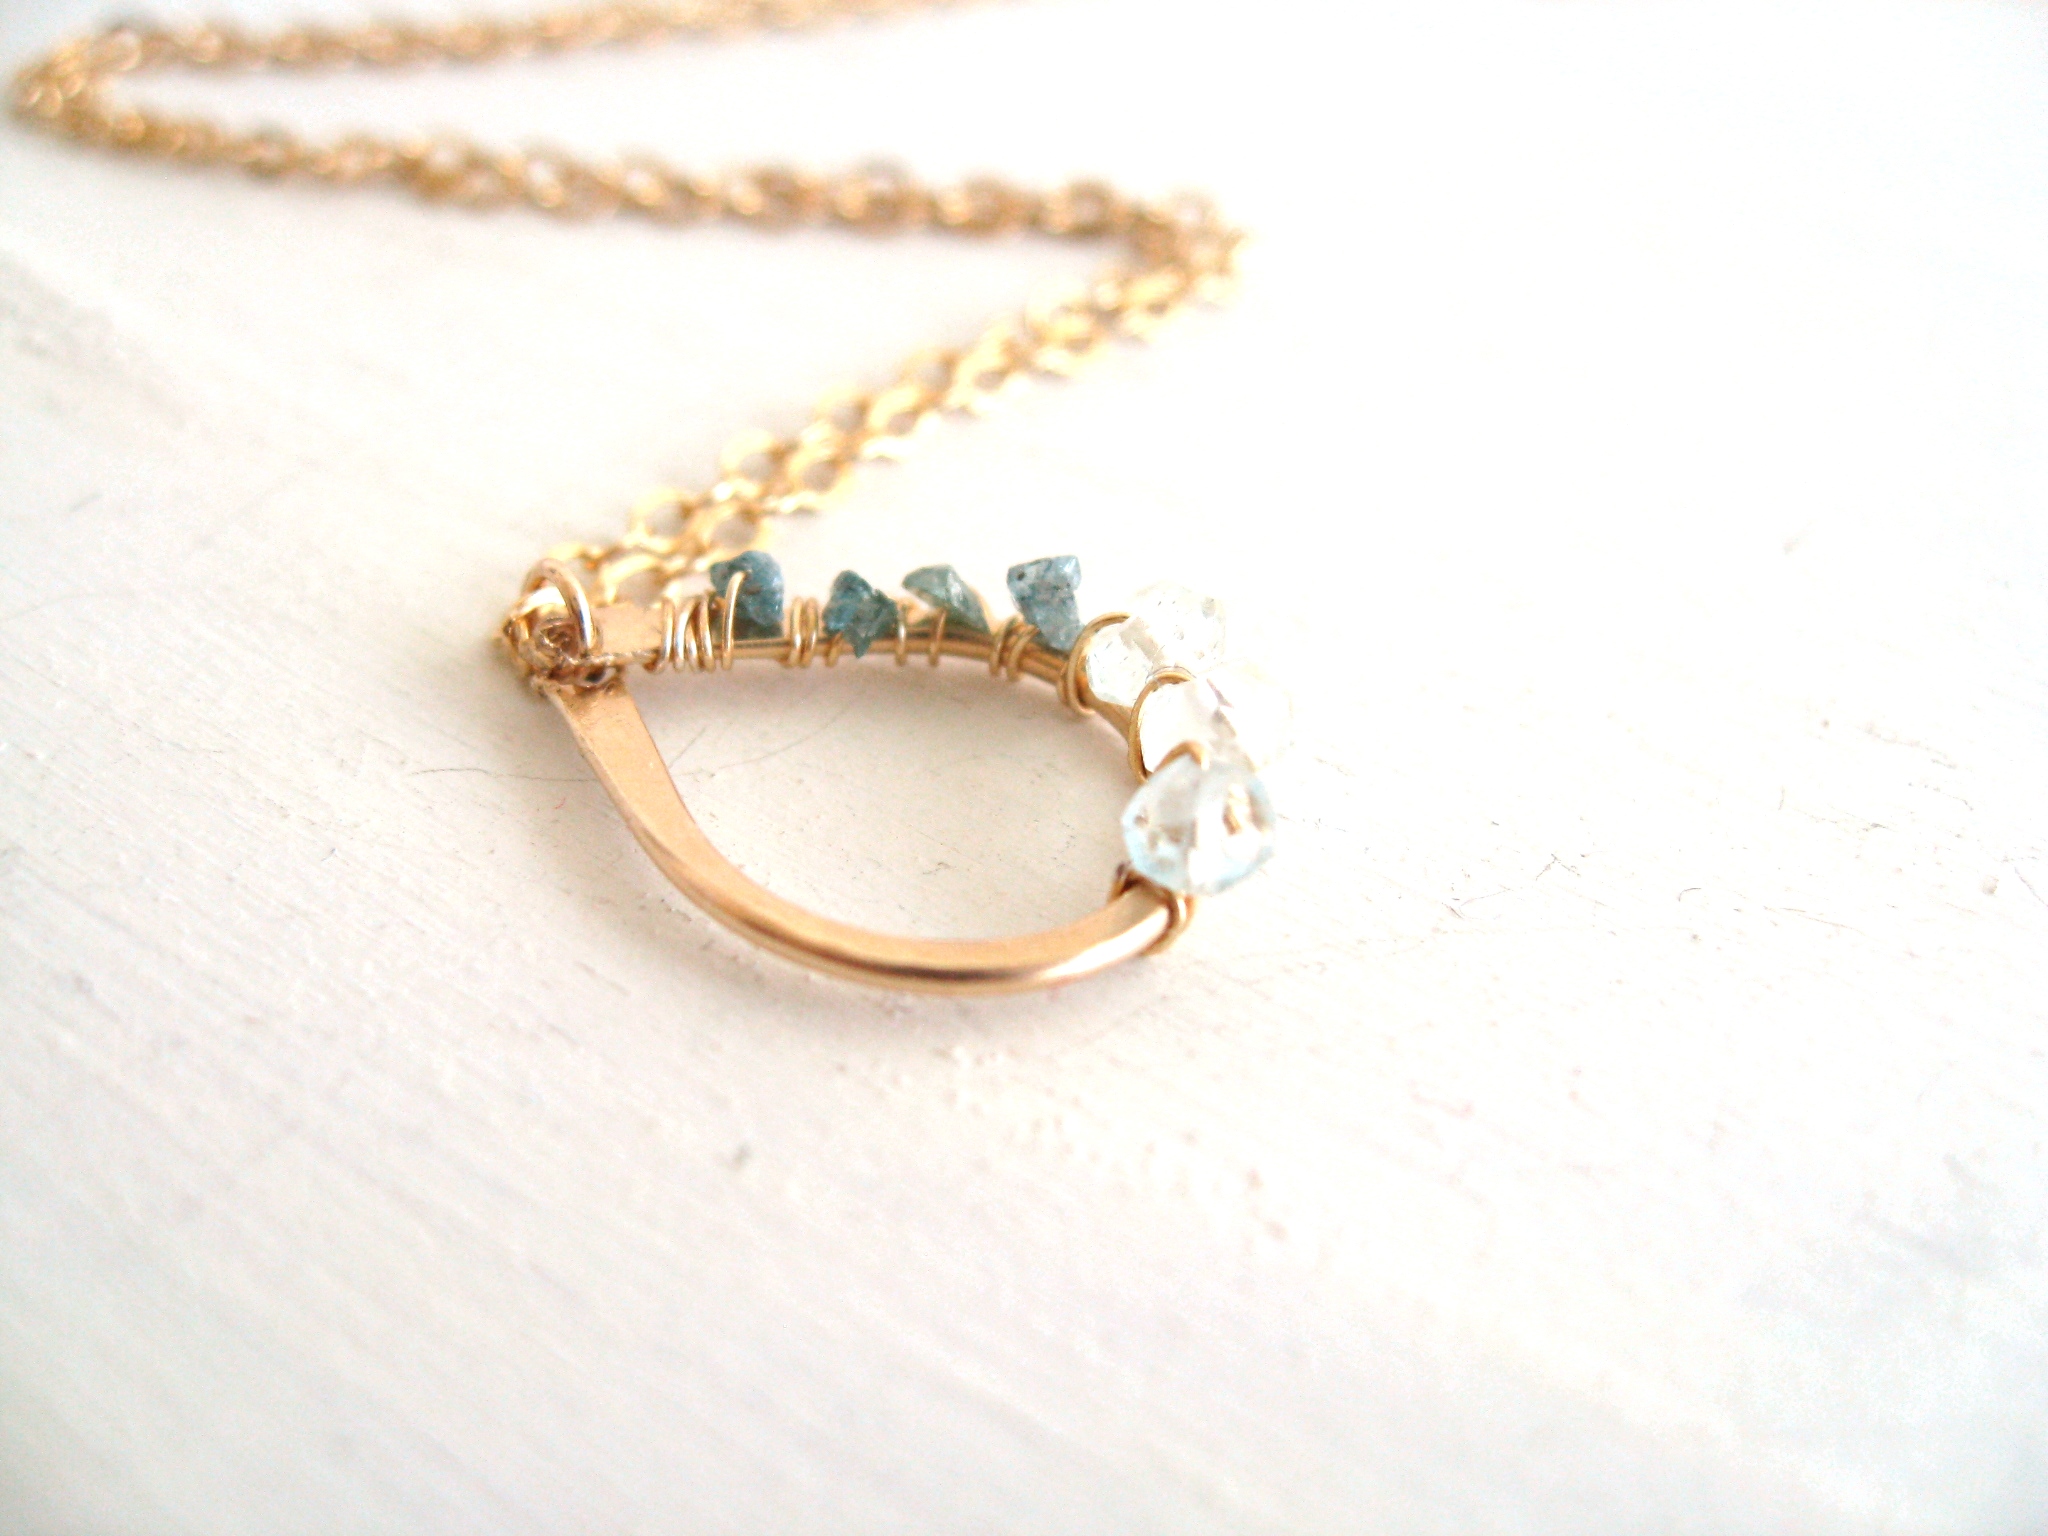 Rough Diamond Necklace in Blue, from Vitrine Designs.